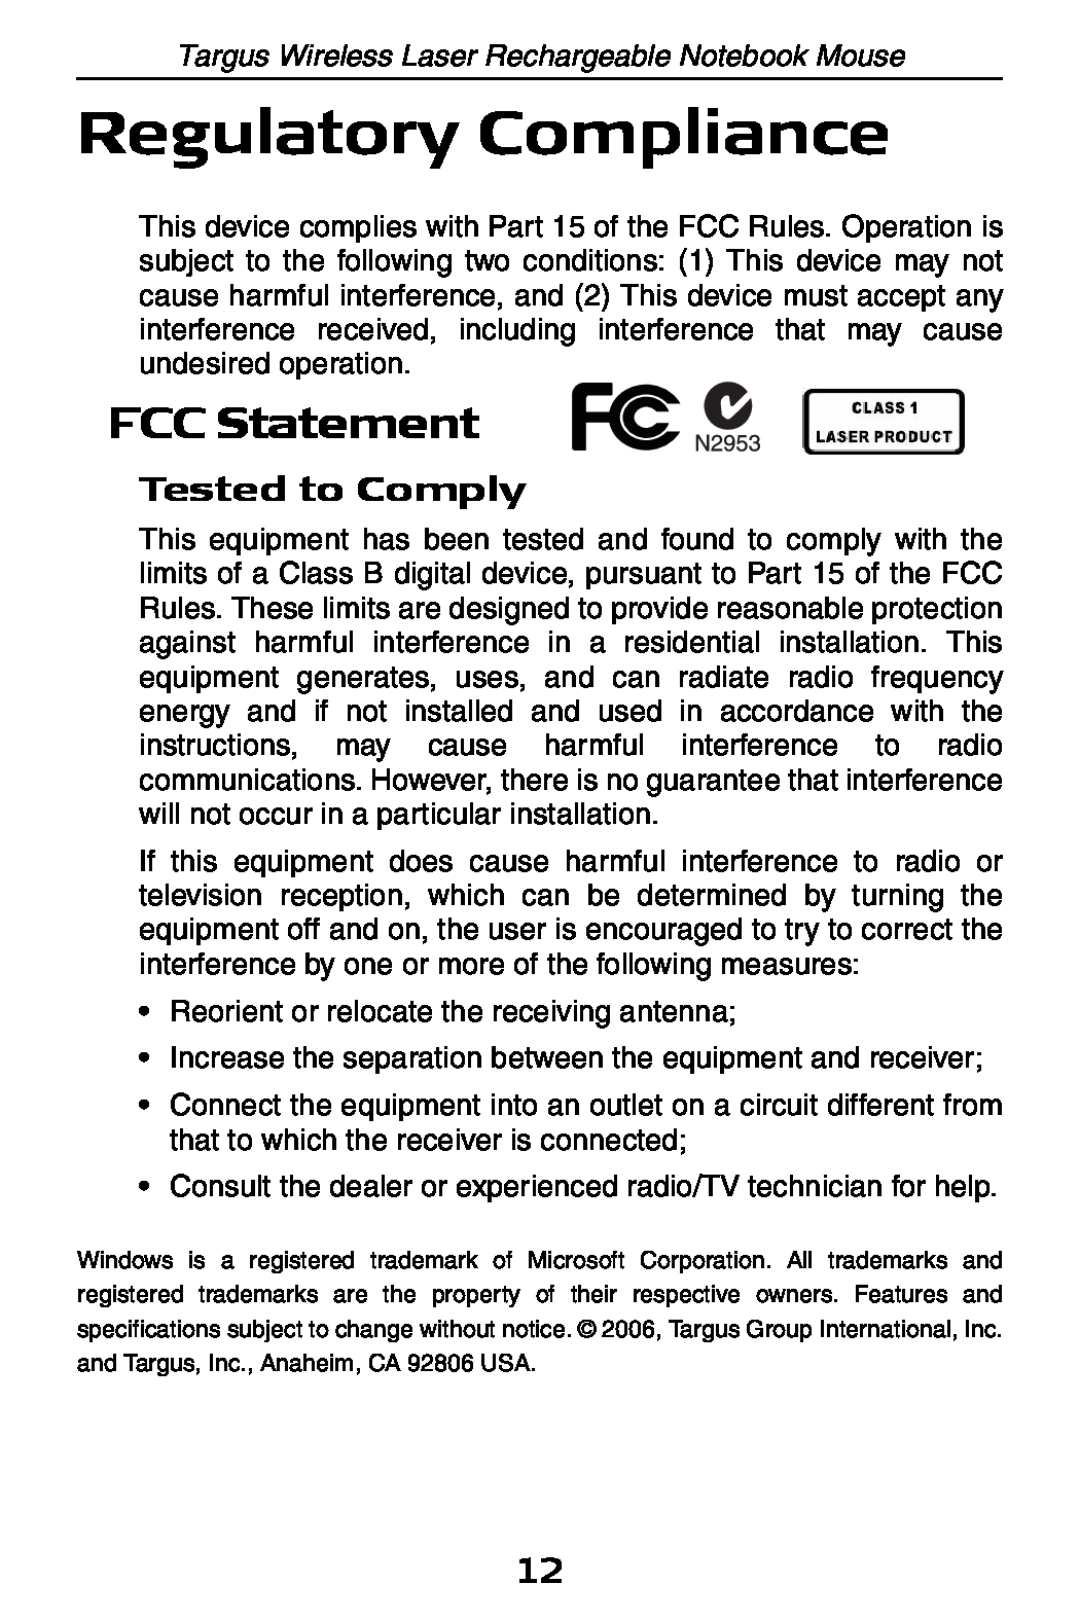 Targus 410-0008-001A manual Regulatory Compliance, FCC Statement, Tested to Comply 